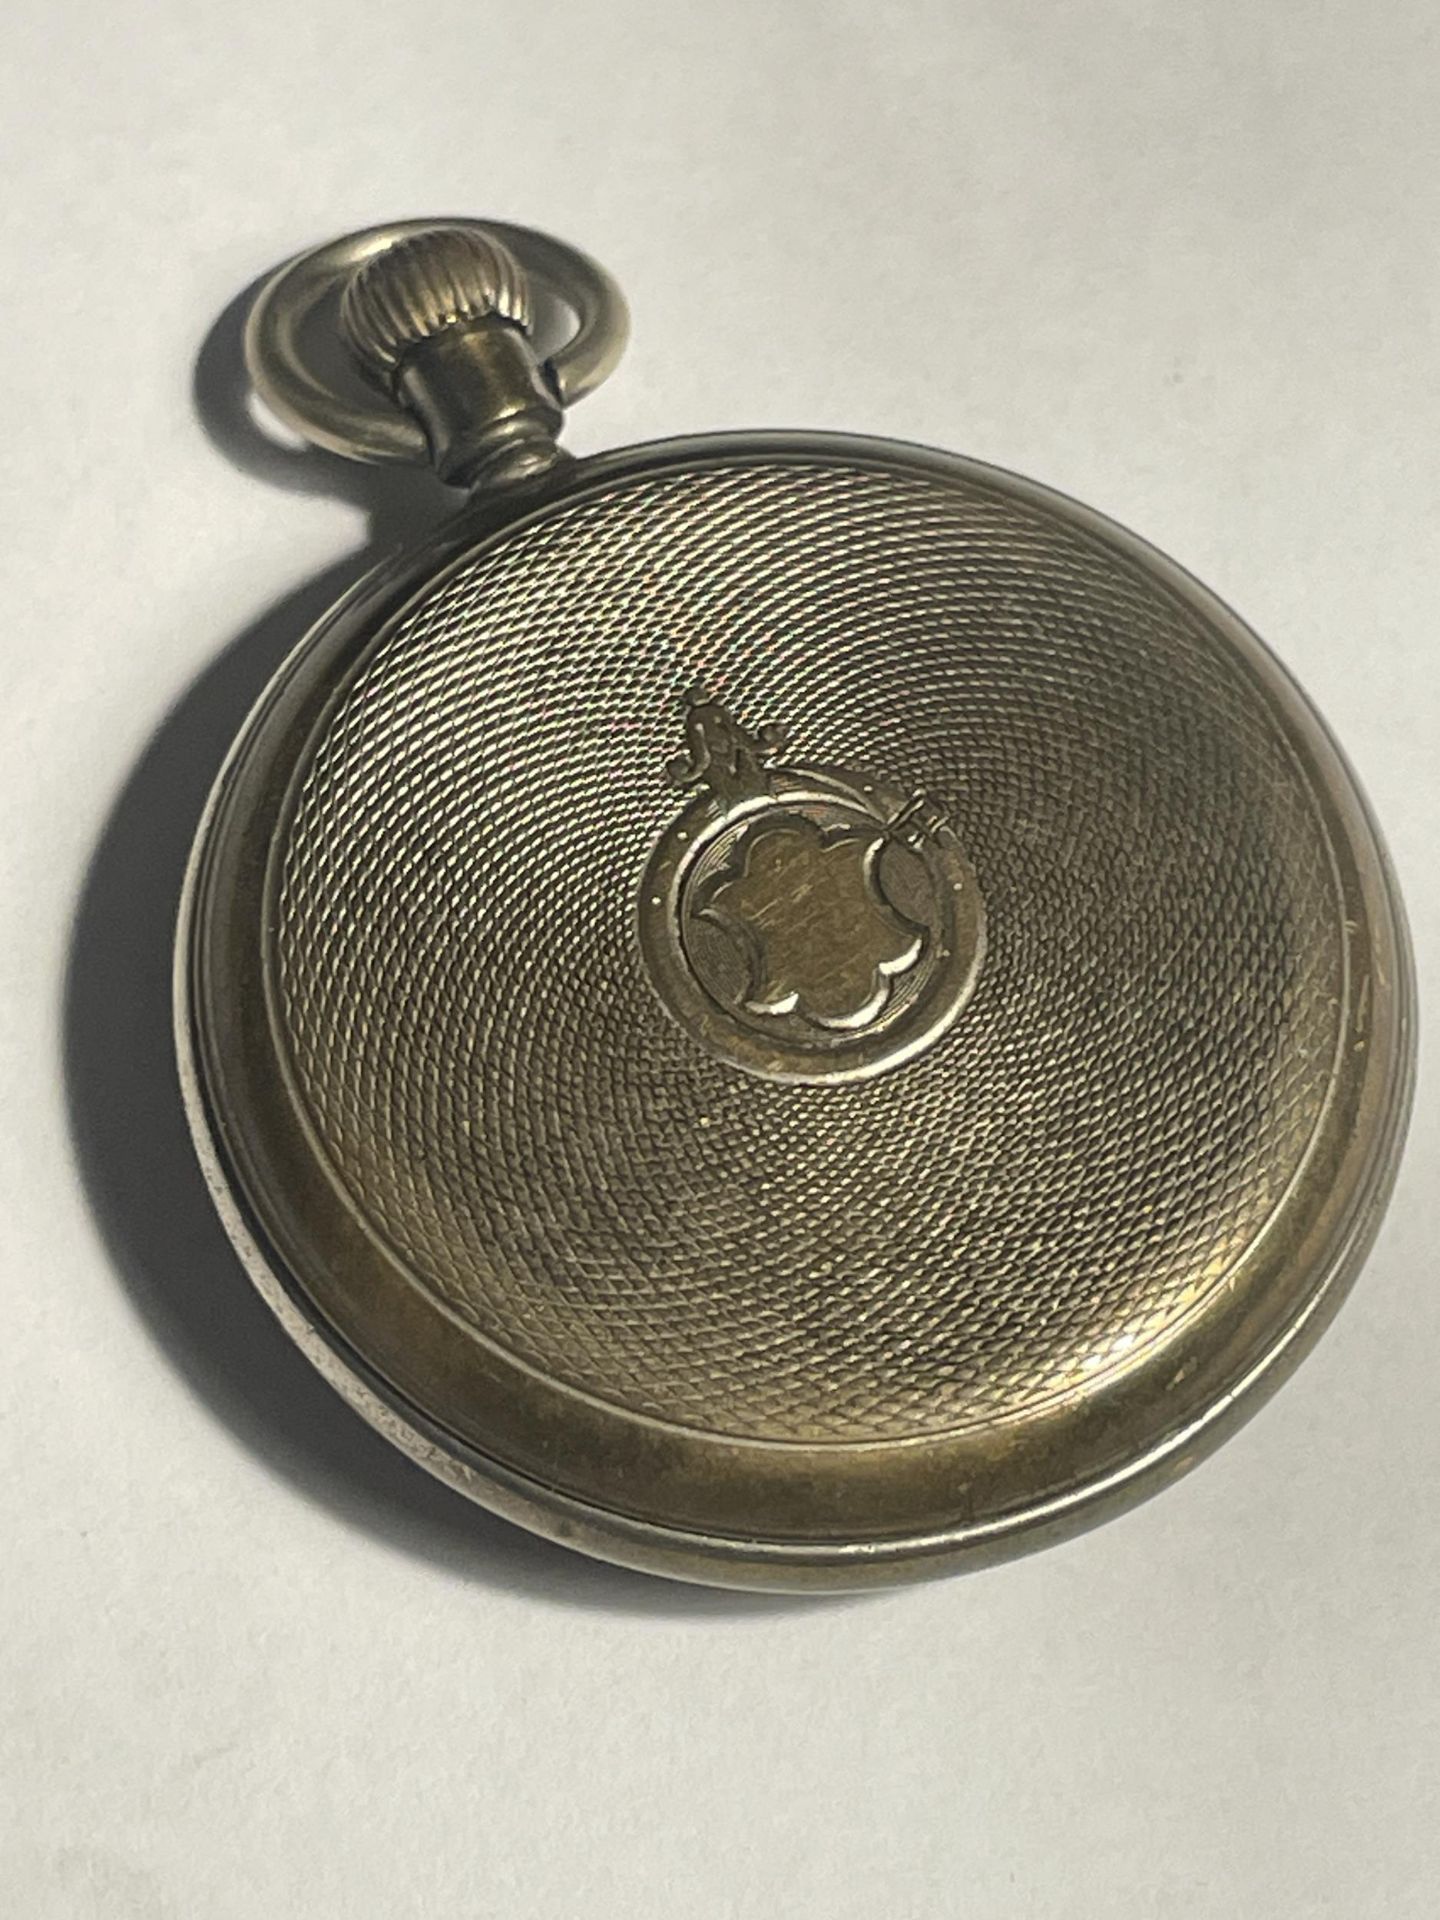 A G GRIFFIN AND SONS TAMWORTH GENTS POCKET WATCH - Image 3 of 3